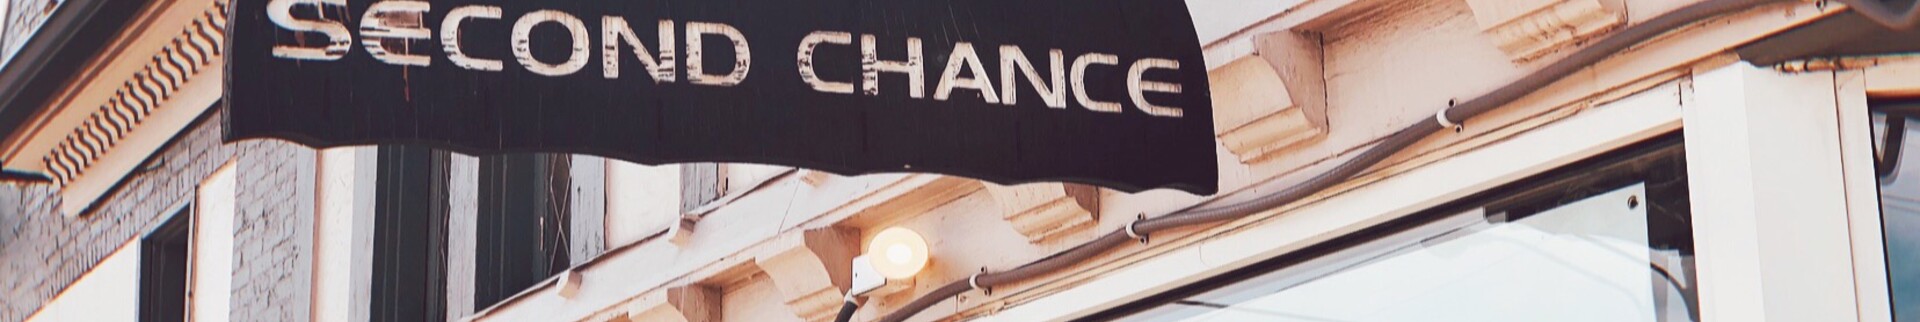 Second Chance Consignment Shop's banner image.